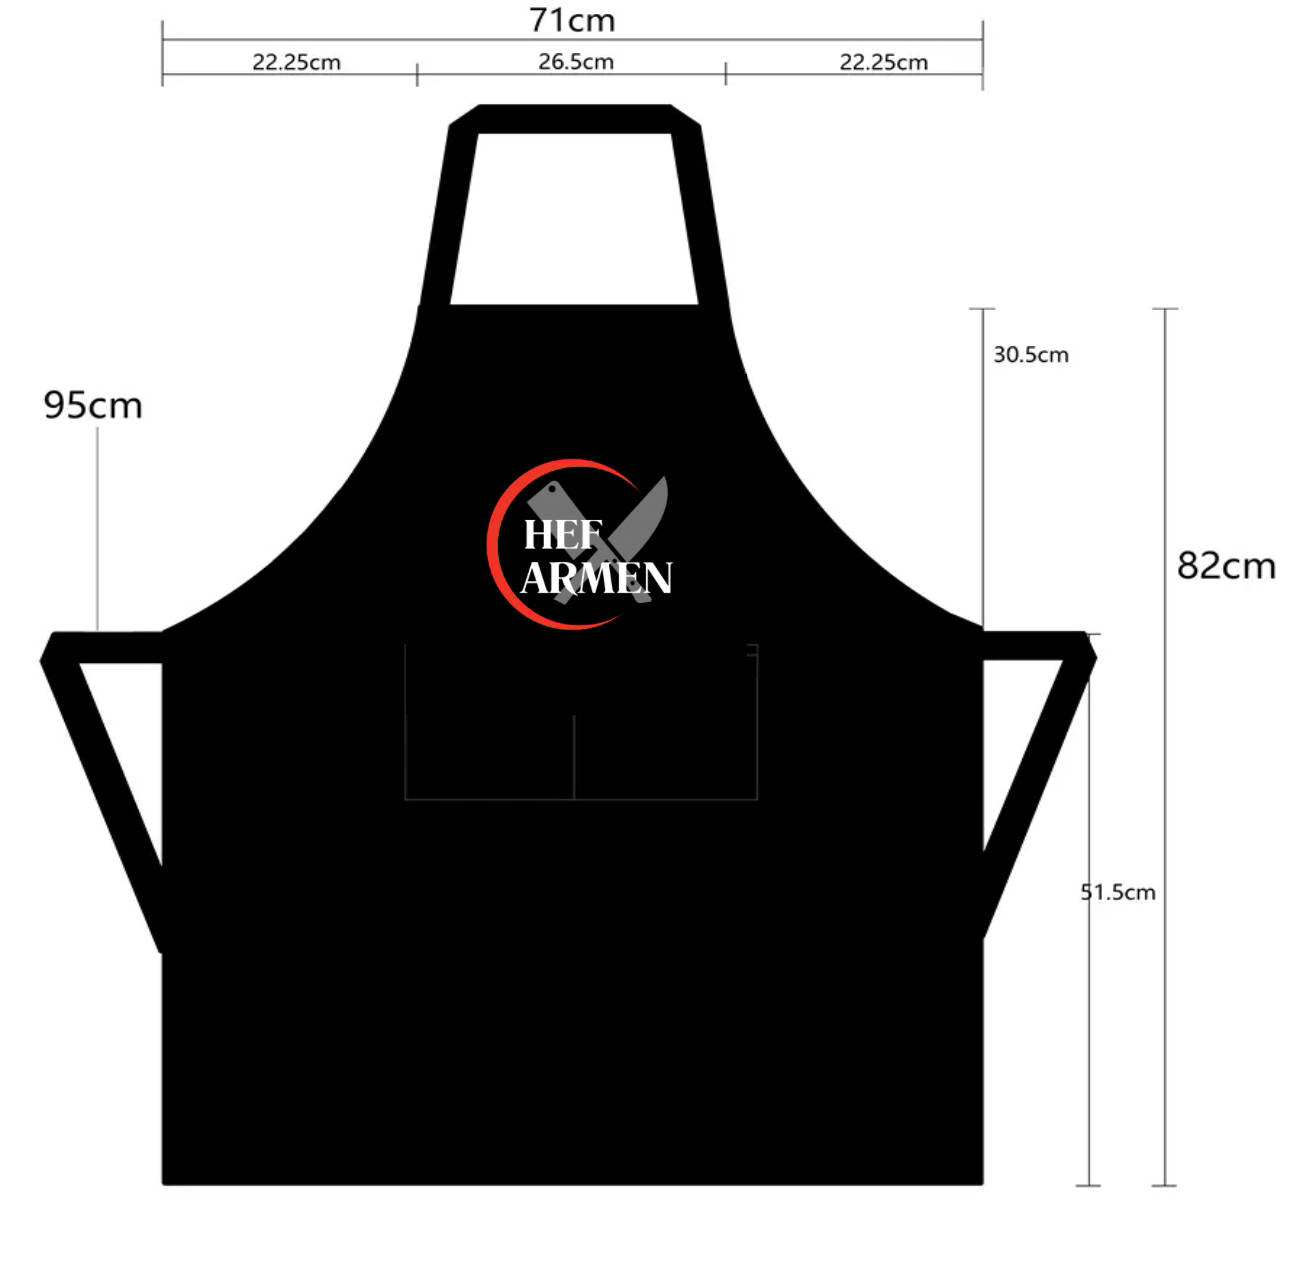 High Quality Branded Apron (BROWN)